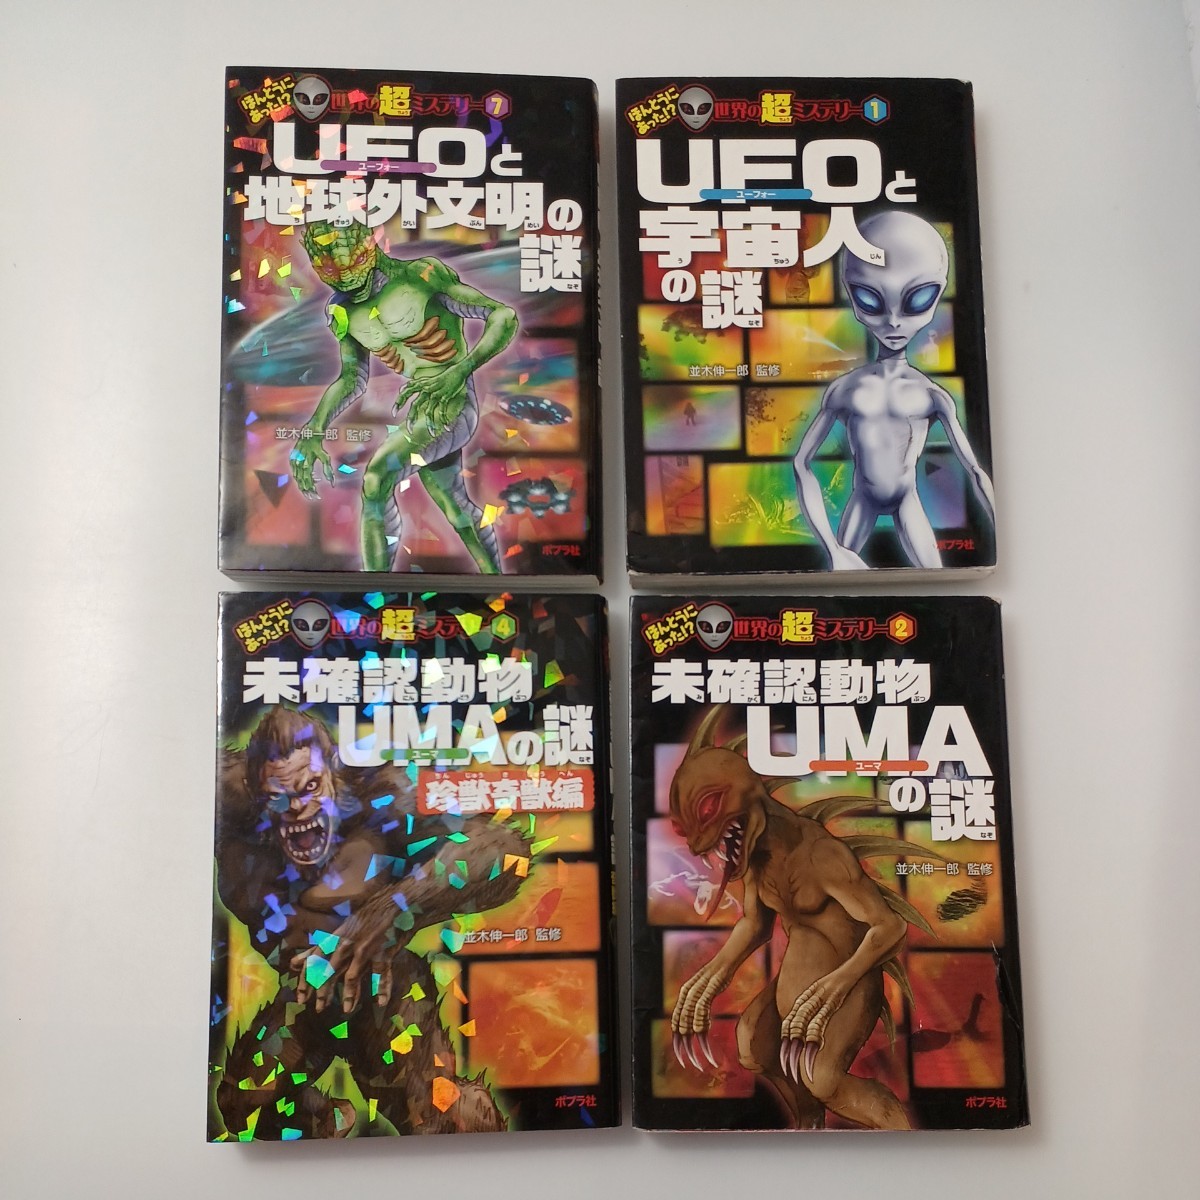 zaa-518!..... was!? world. super mystery 4 pcs. set UFO. the earth out writing Akira. mystery /UFO. extraterrestrial. mystery other 2 pcs. average tree . one .[..]